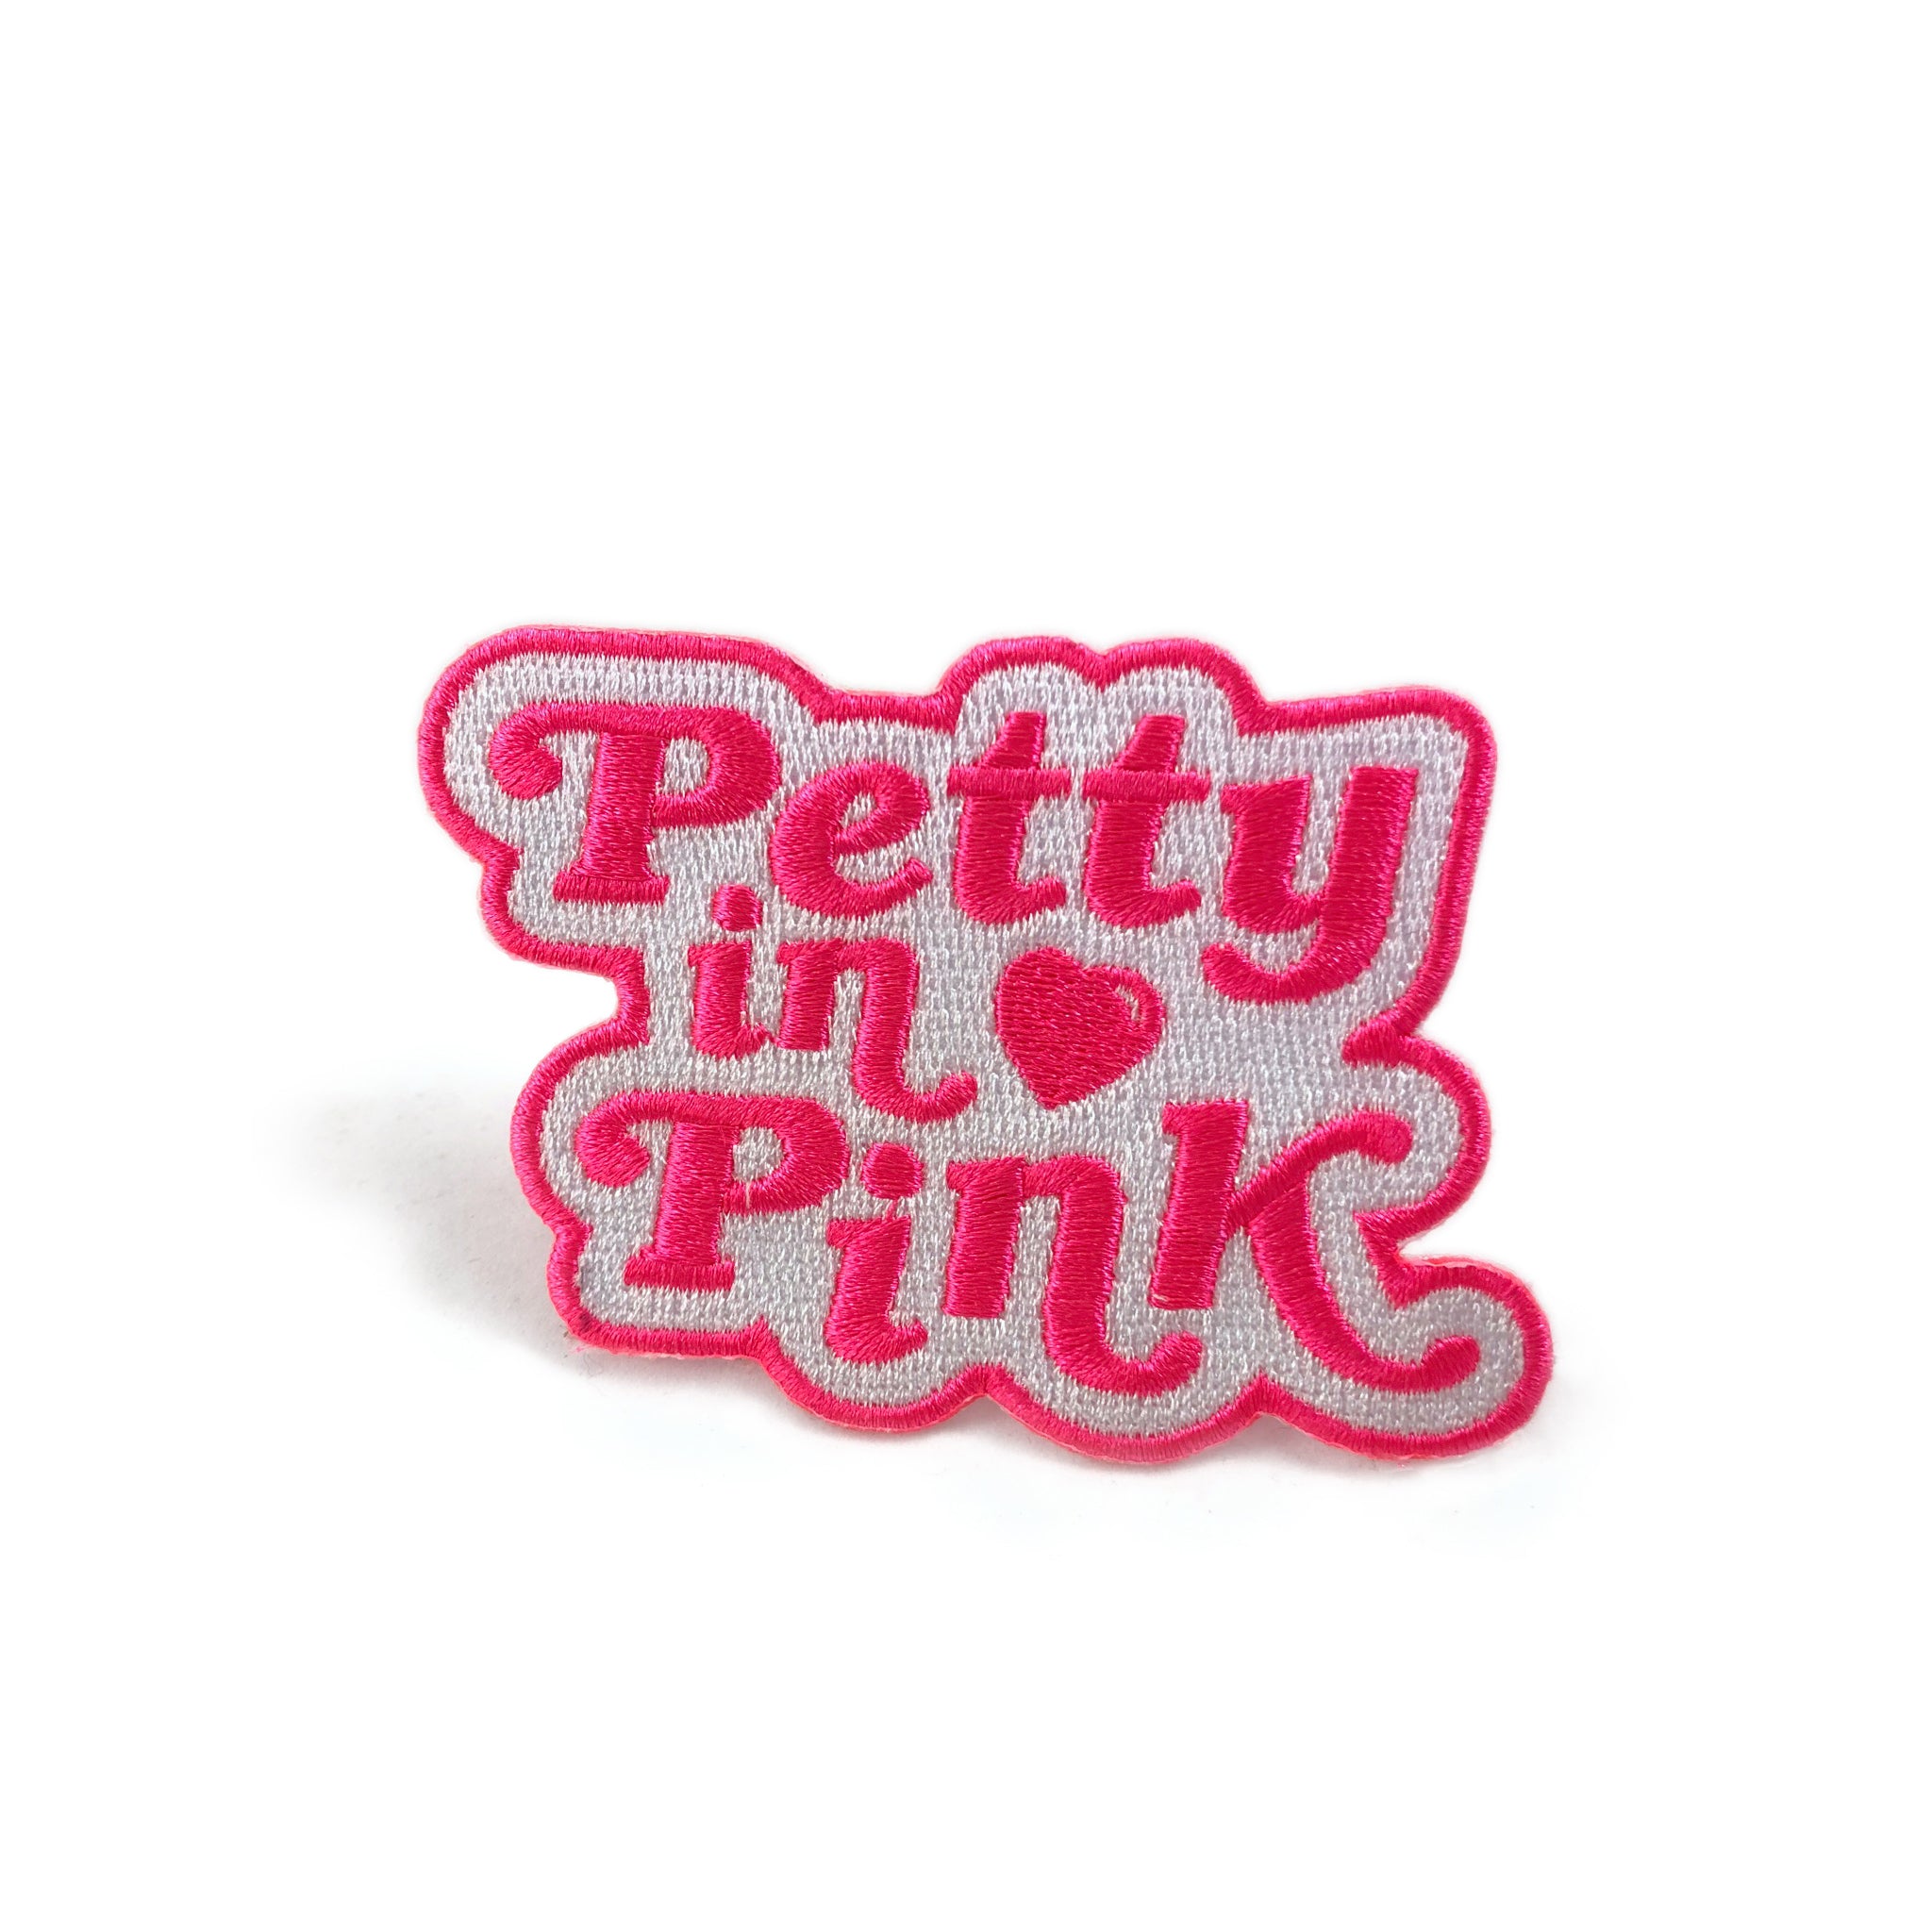 Petty In Pink patch